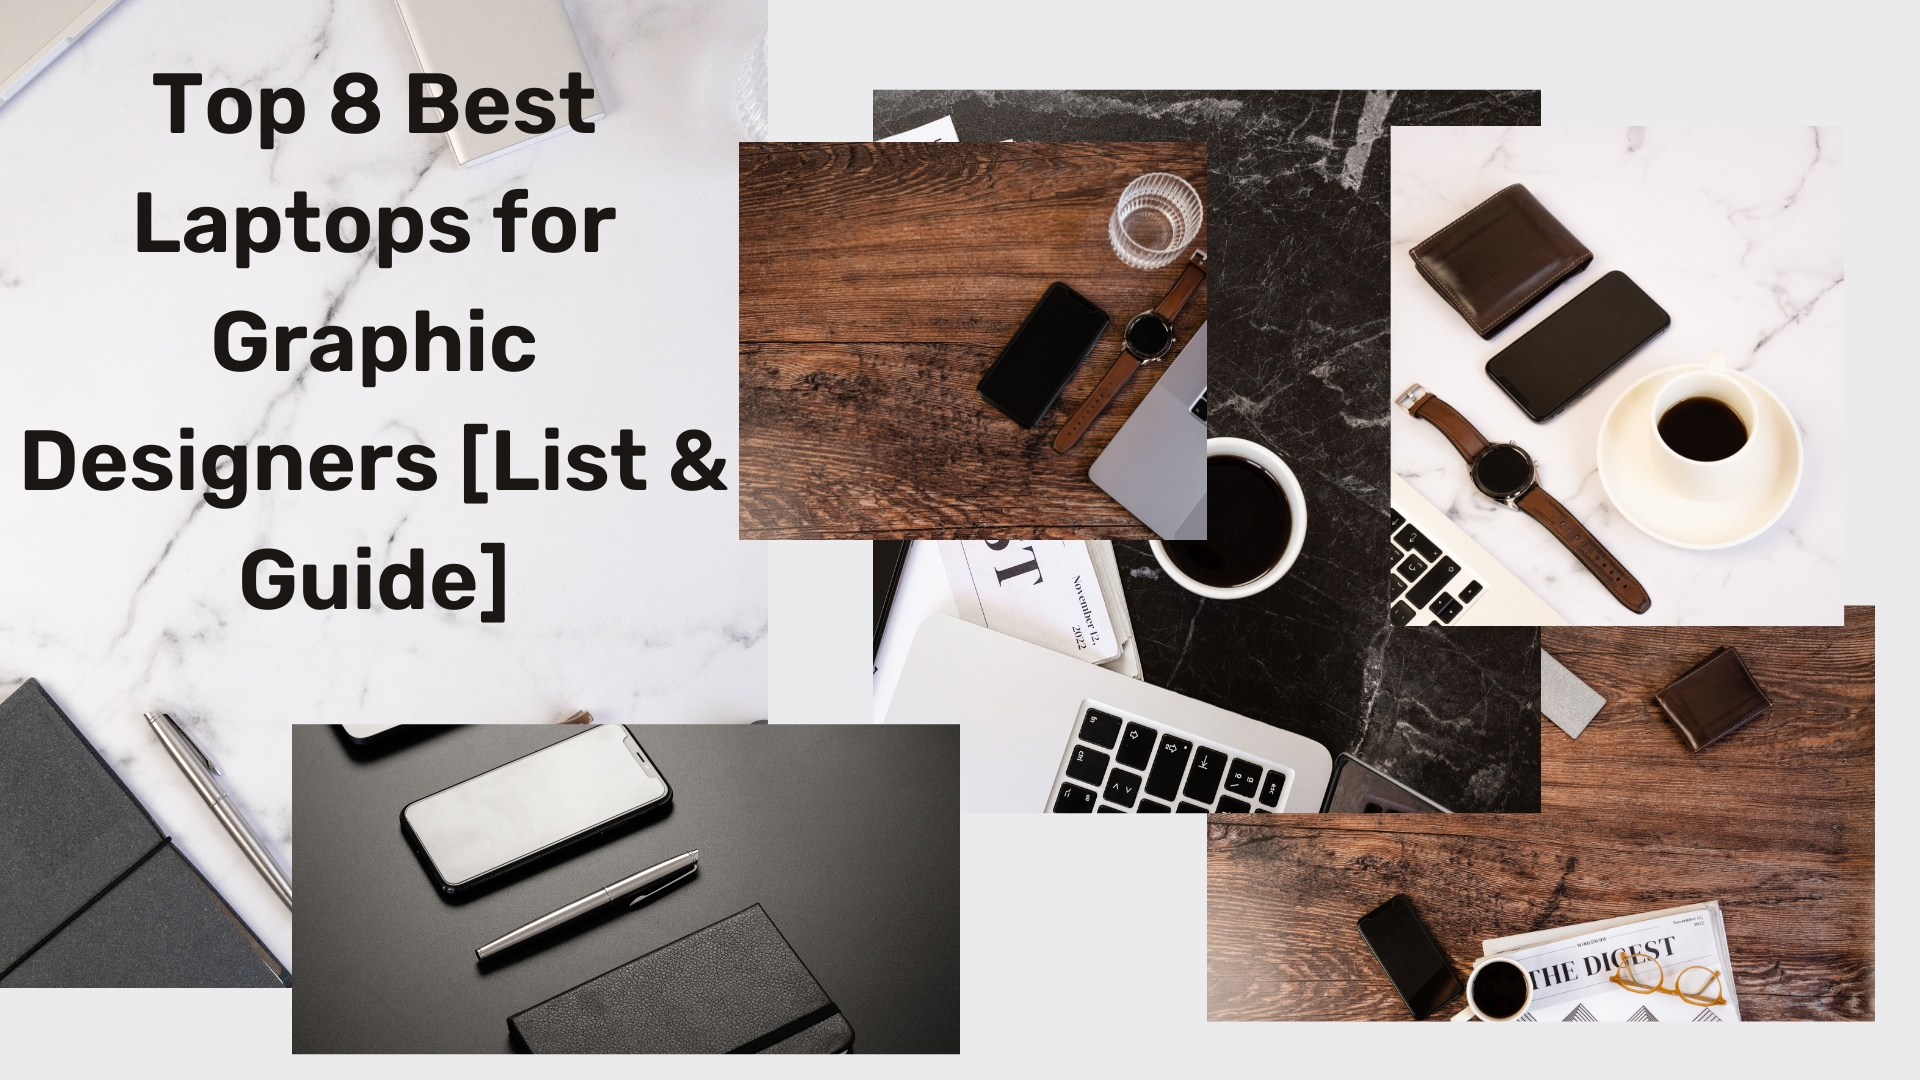 Top 8 Best Laptops for Graphic Designers [List & Guide]